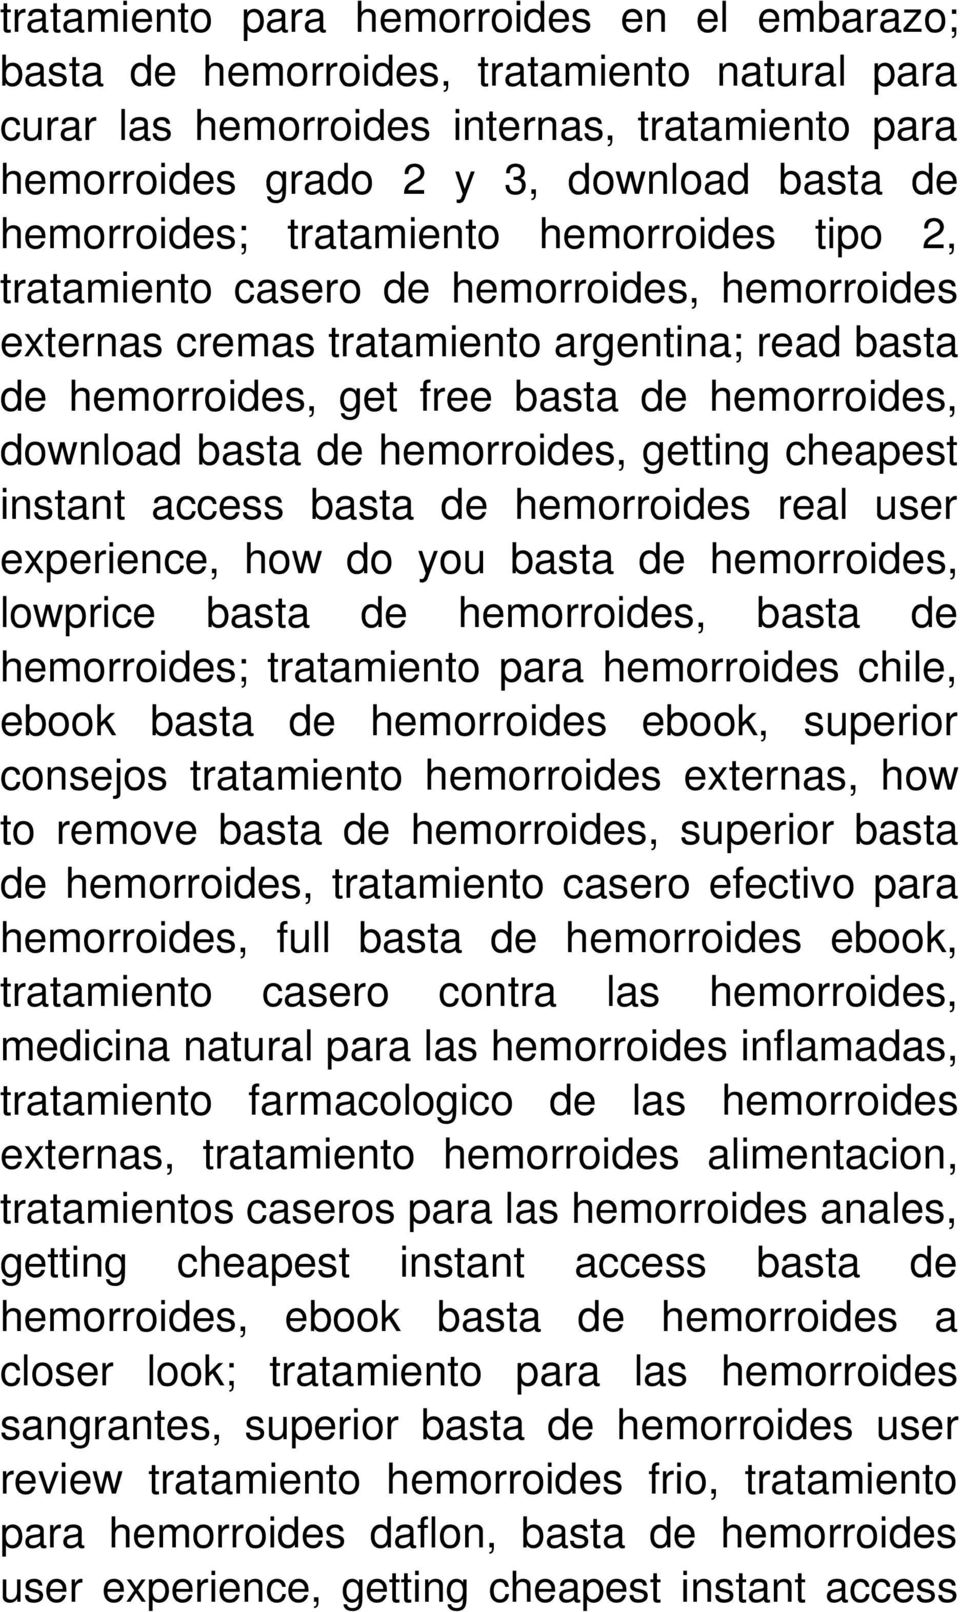 hemorroides, getting cheapest instant access basta de hemorroides real user experience, how do you basta de hemorroides, lowprice basta de hemorroides, basta de hemorroides; tratamiento para